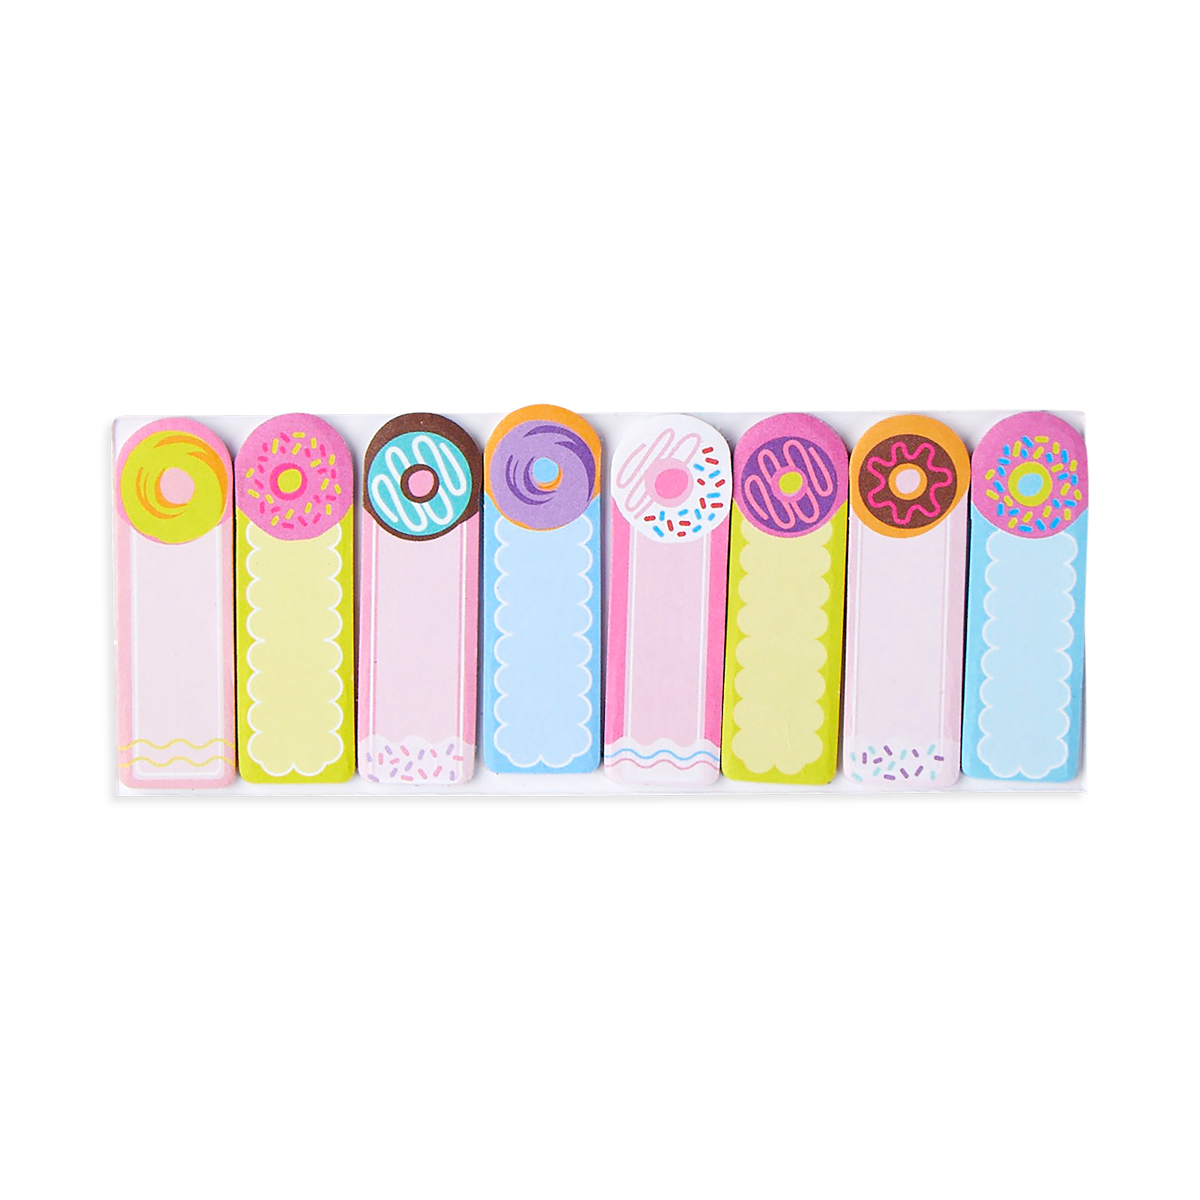 Note Pals Sticky Tabs - Dainty Donuts - Toys To Love